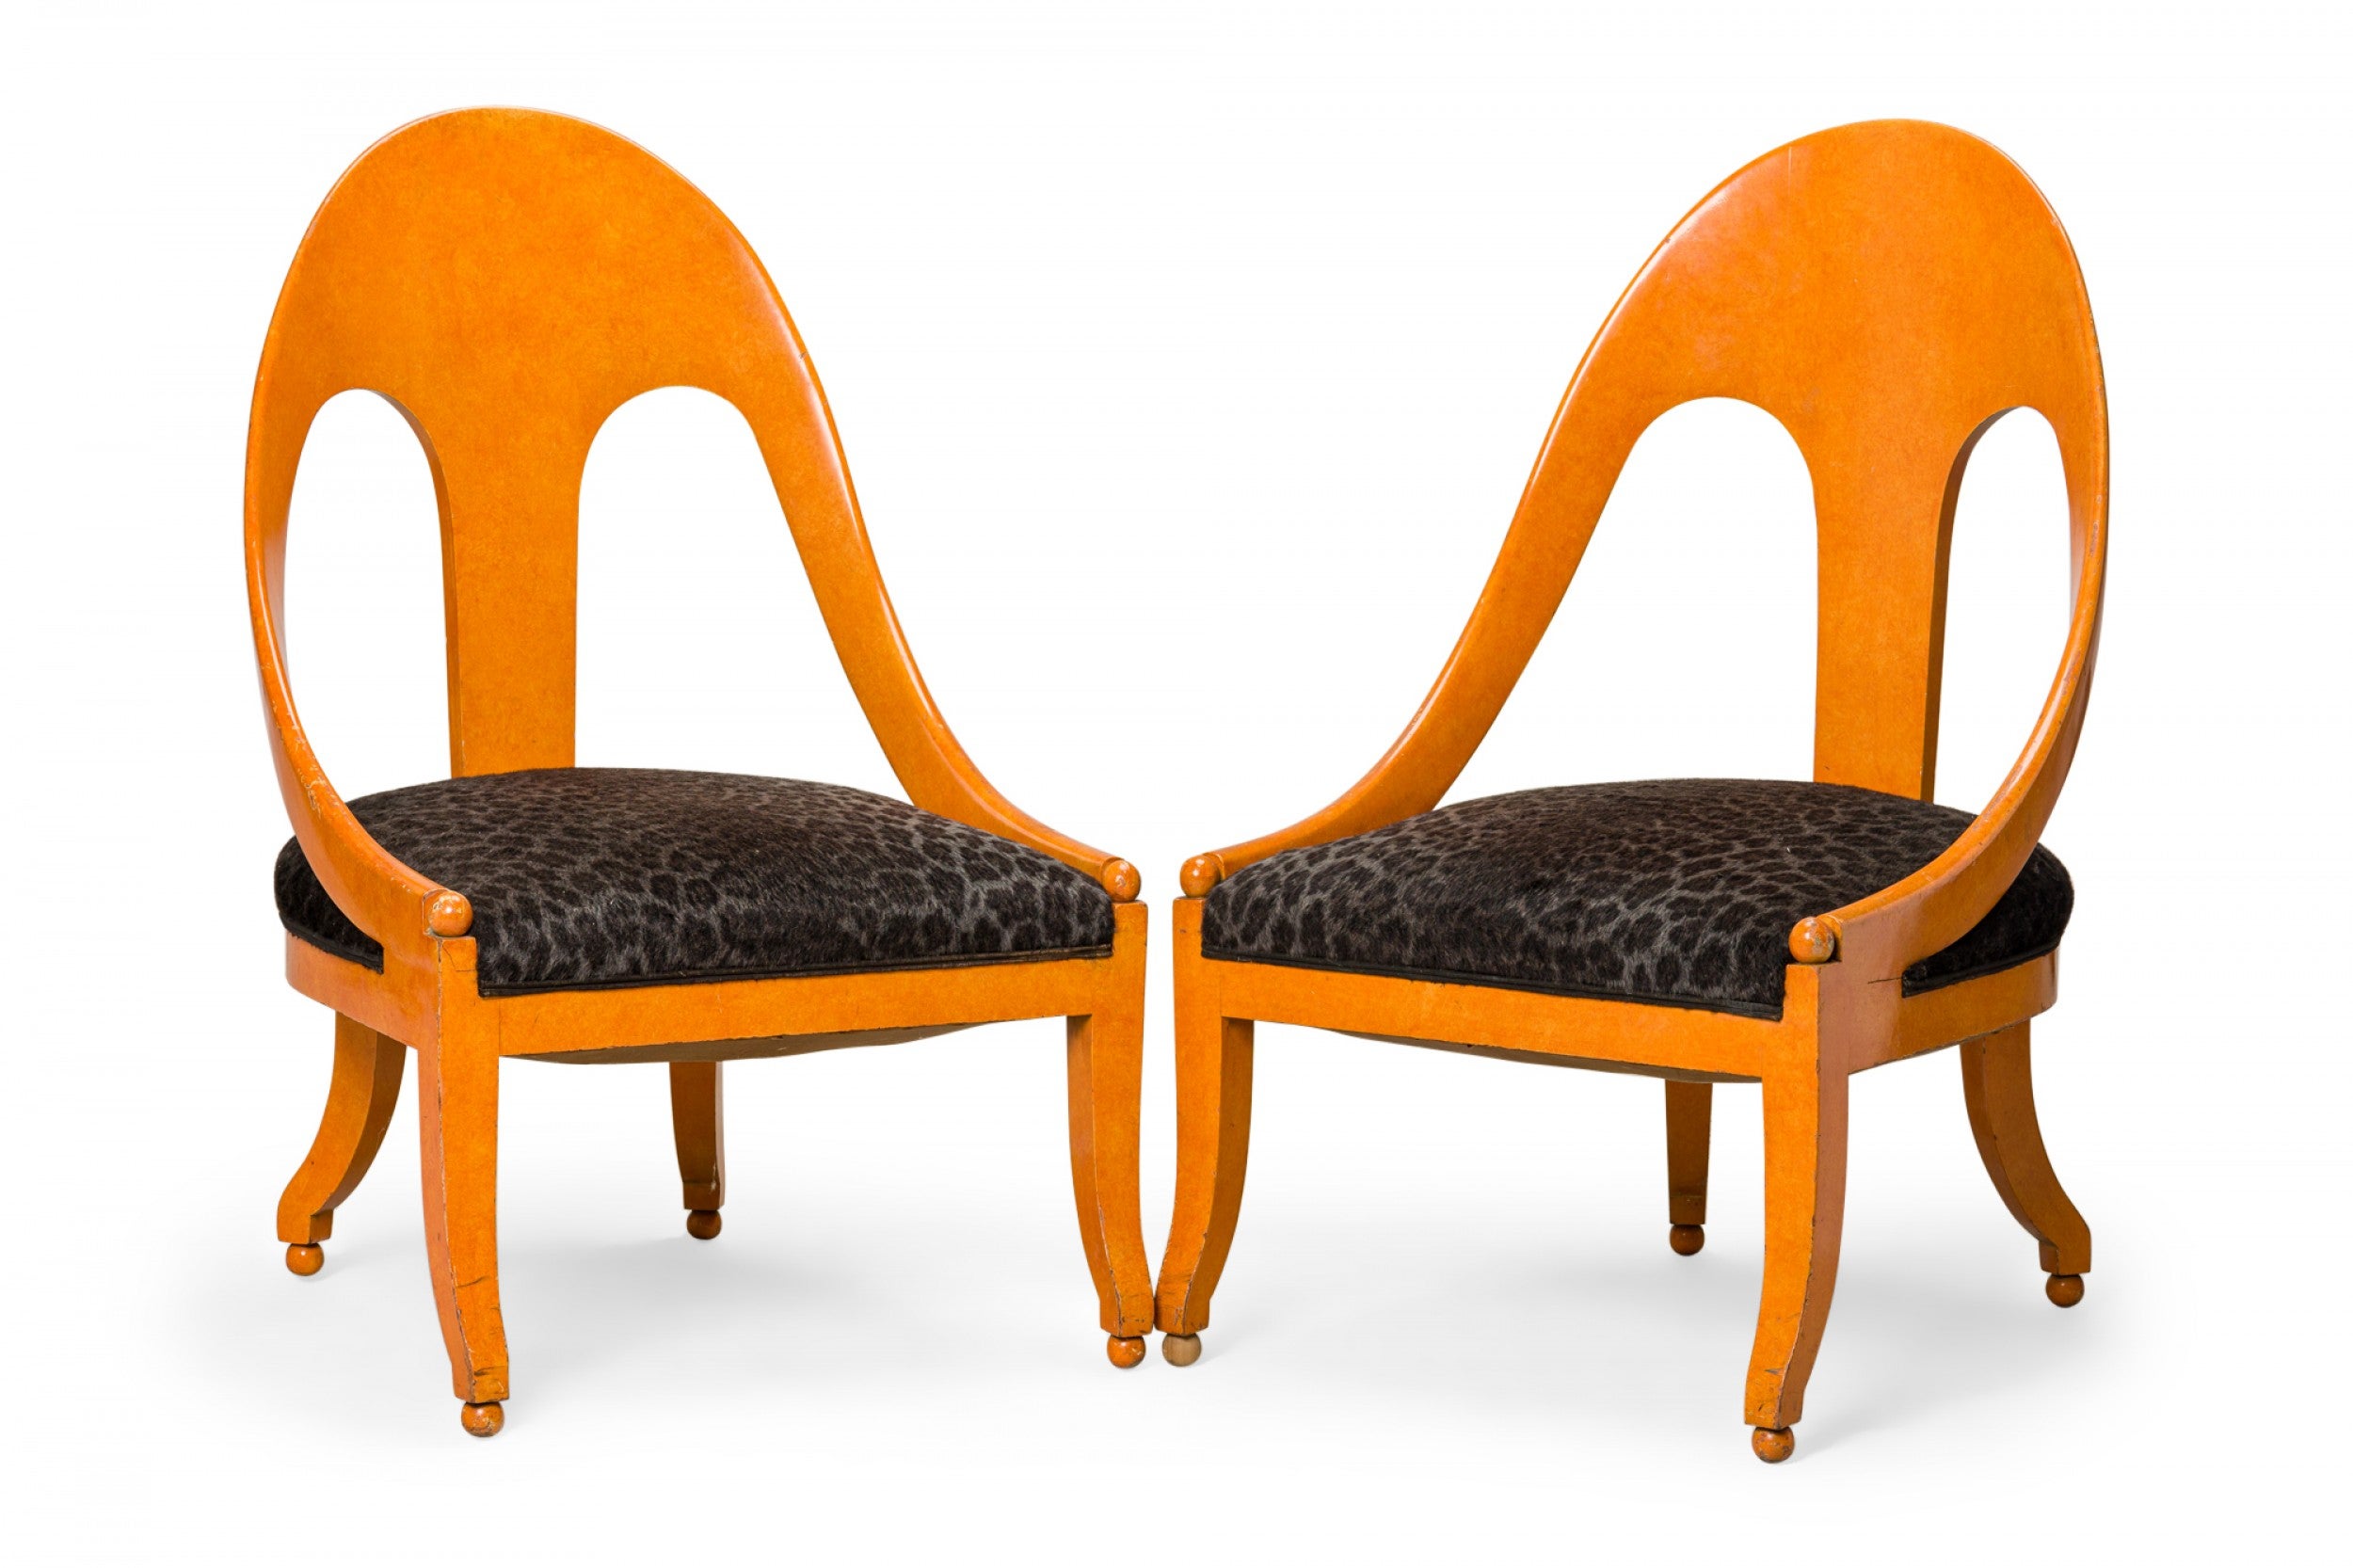 Pair of Orange Lacquer Black Leopard Print Upholstery Spoon Back Side Chairs